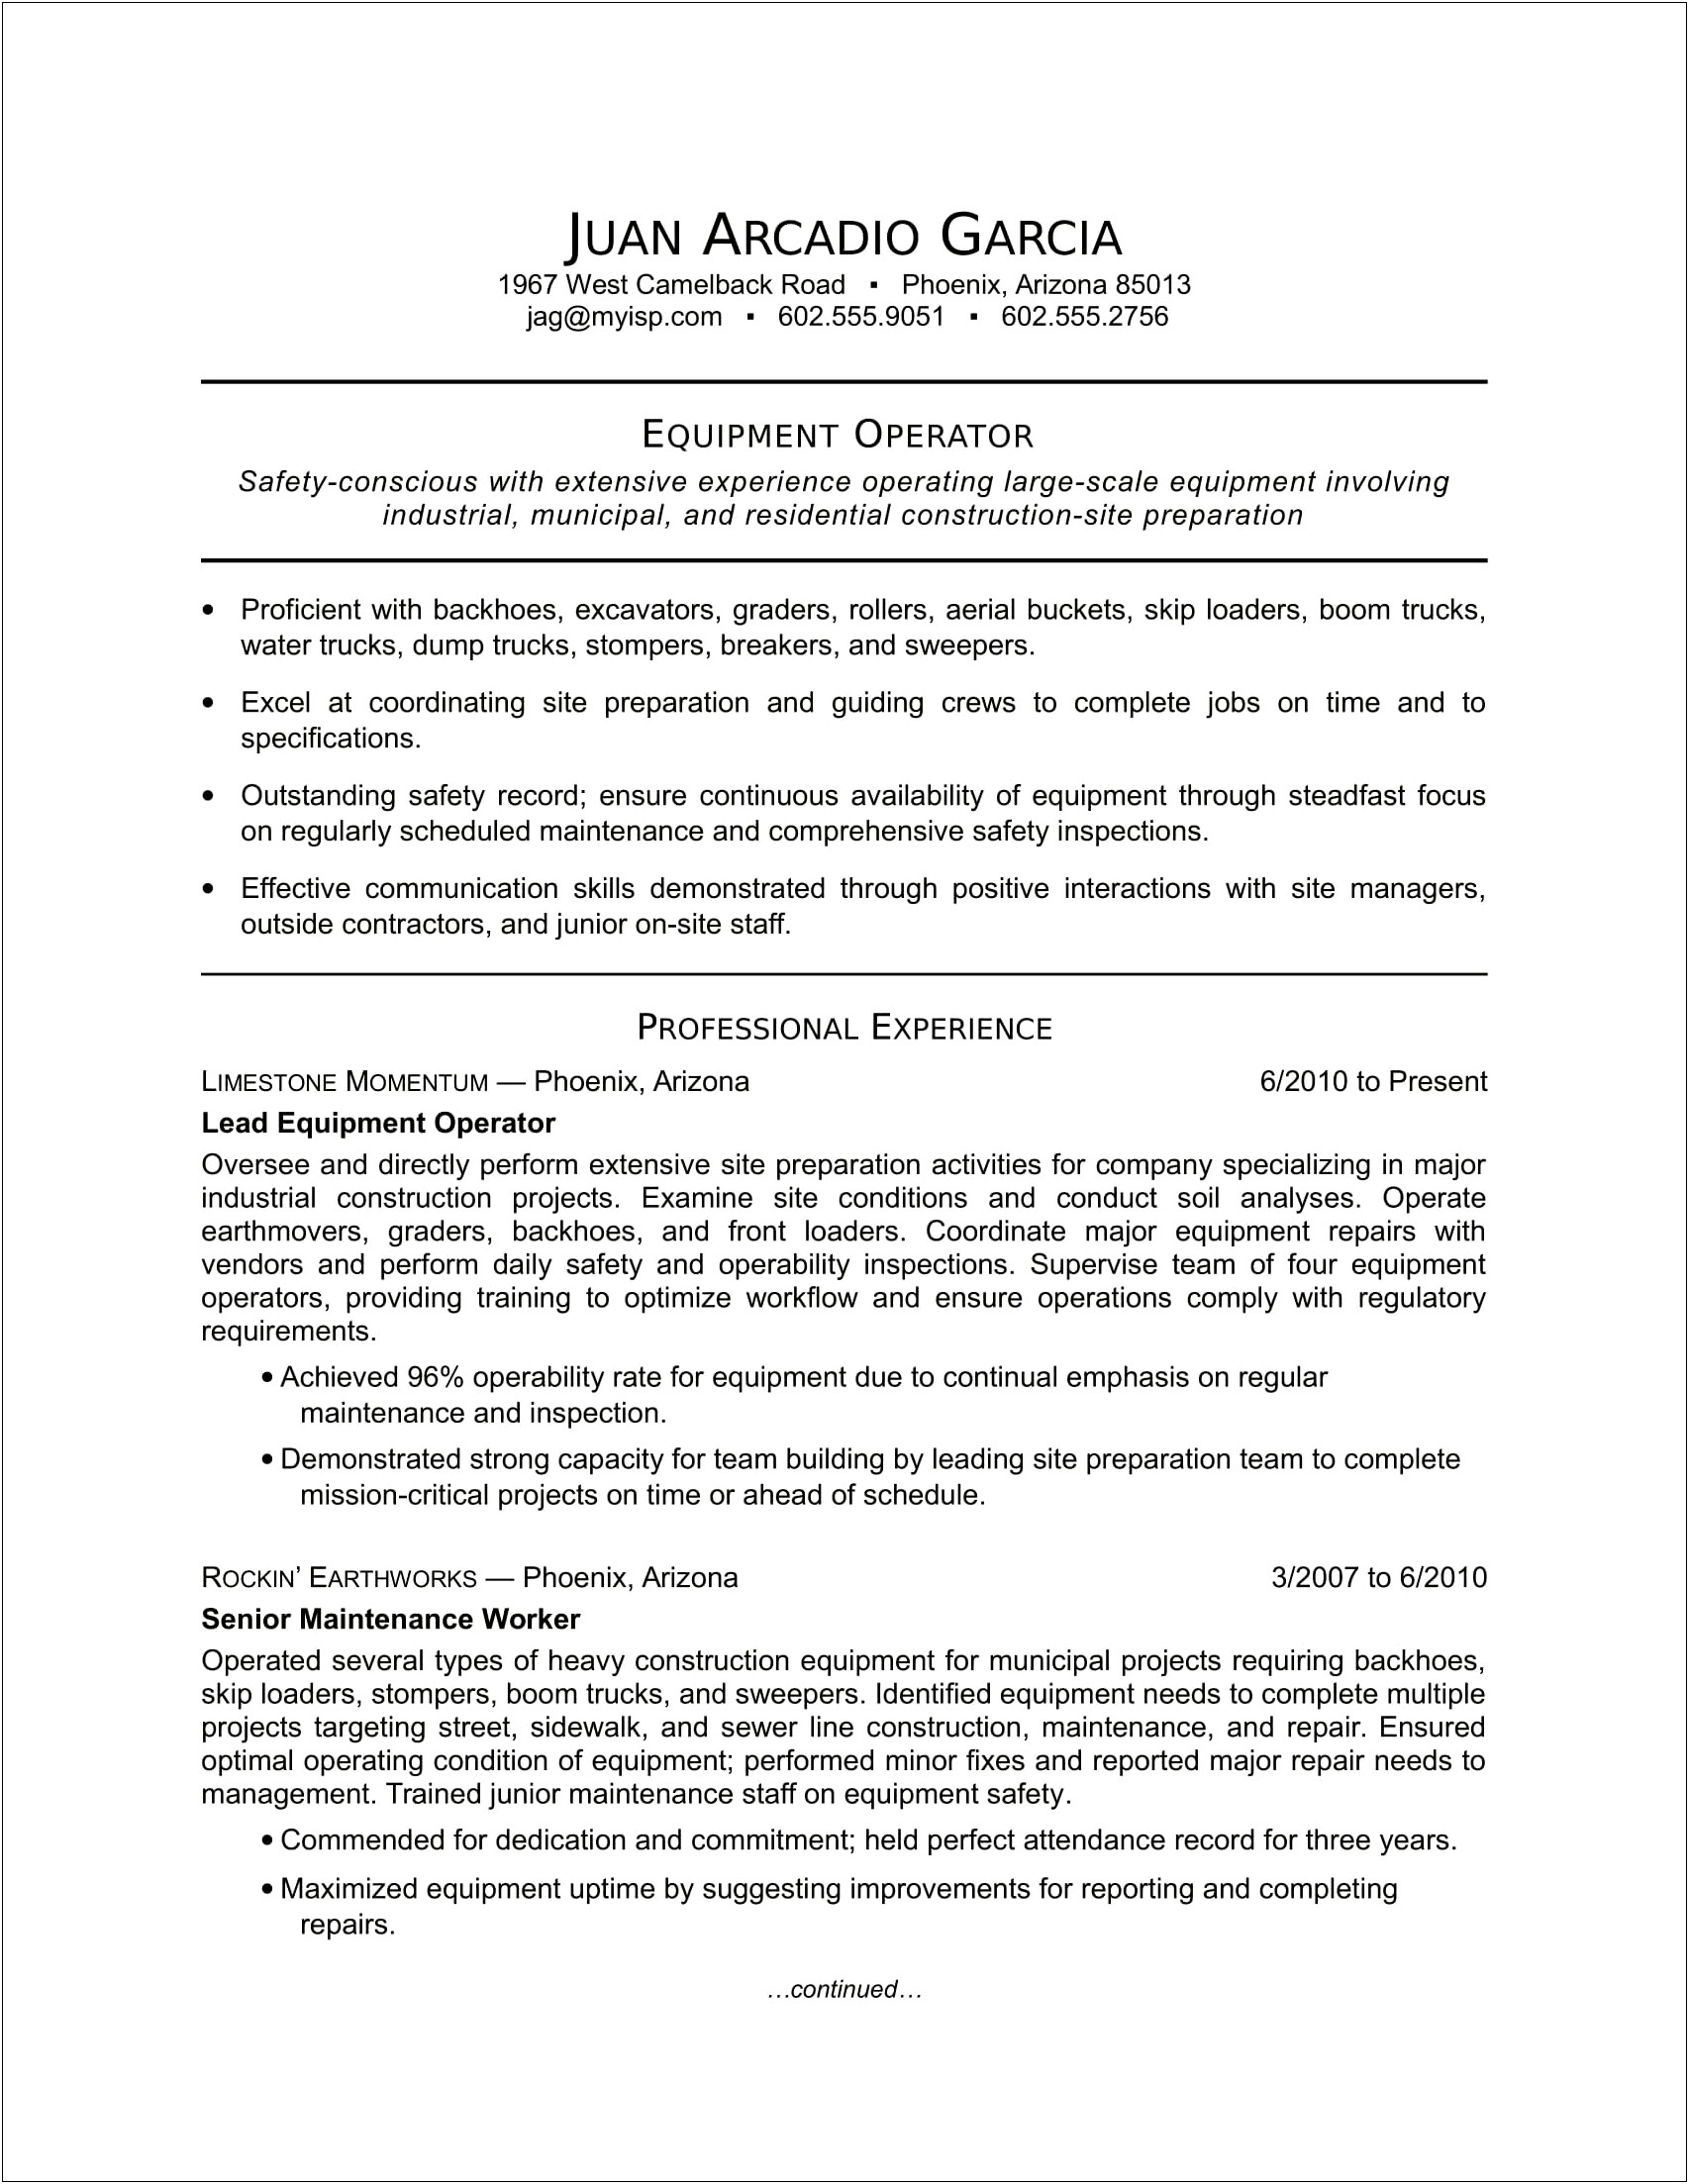 Resume Objective For Industrial Worker